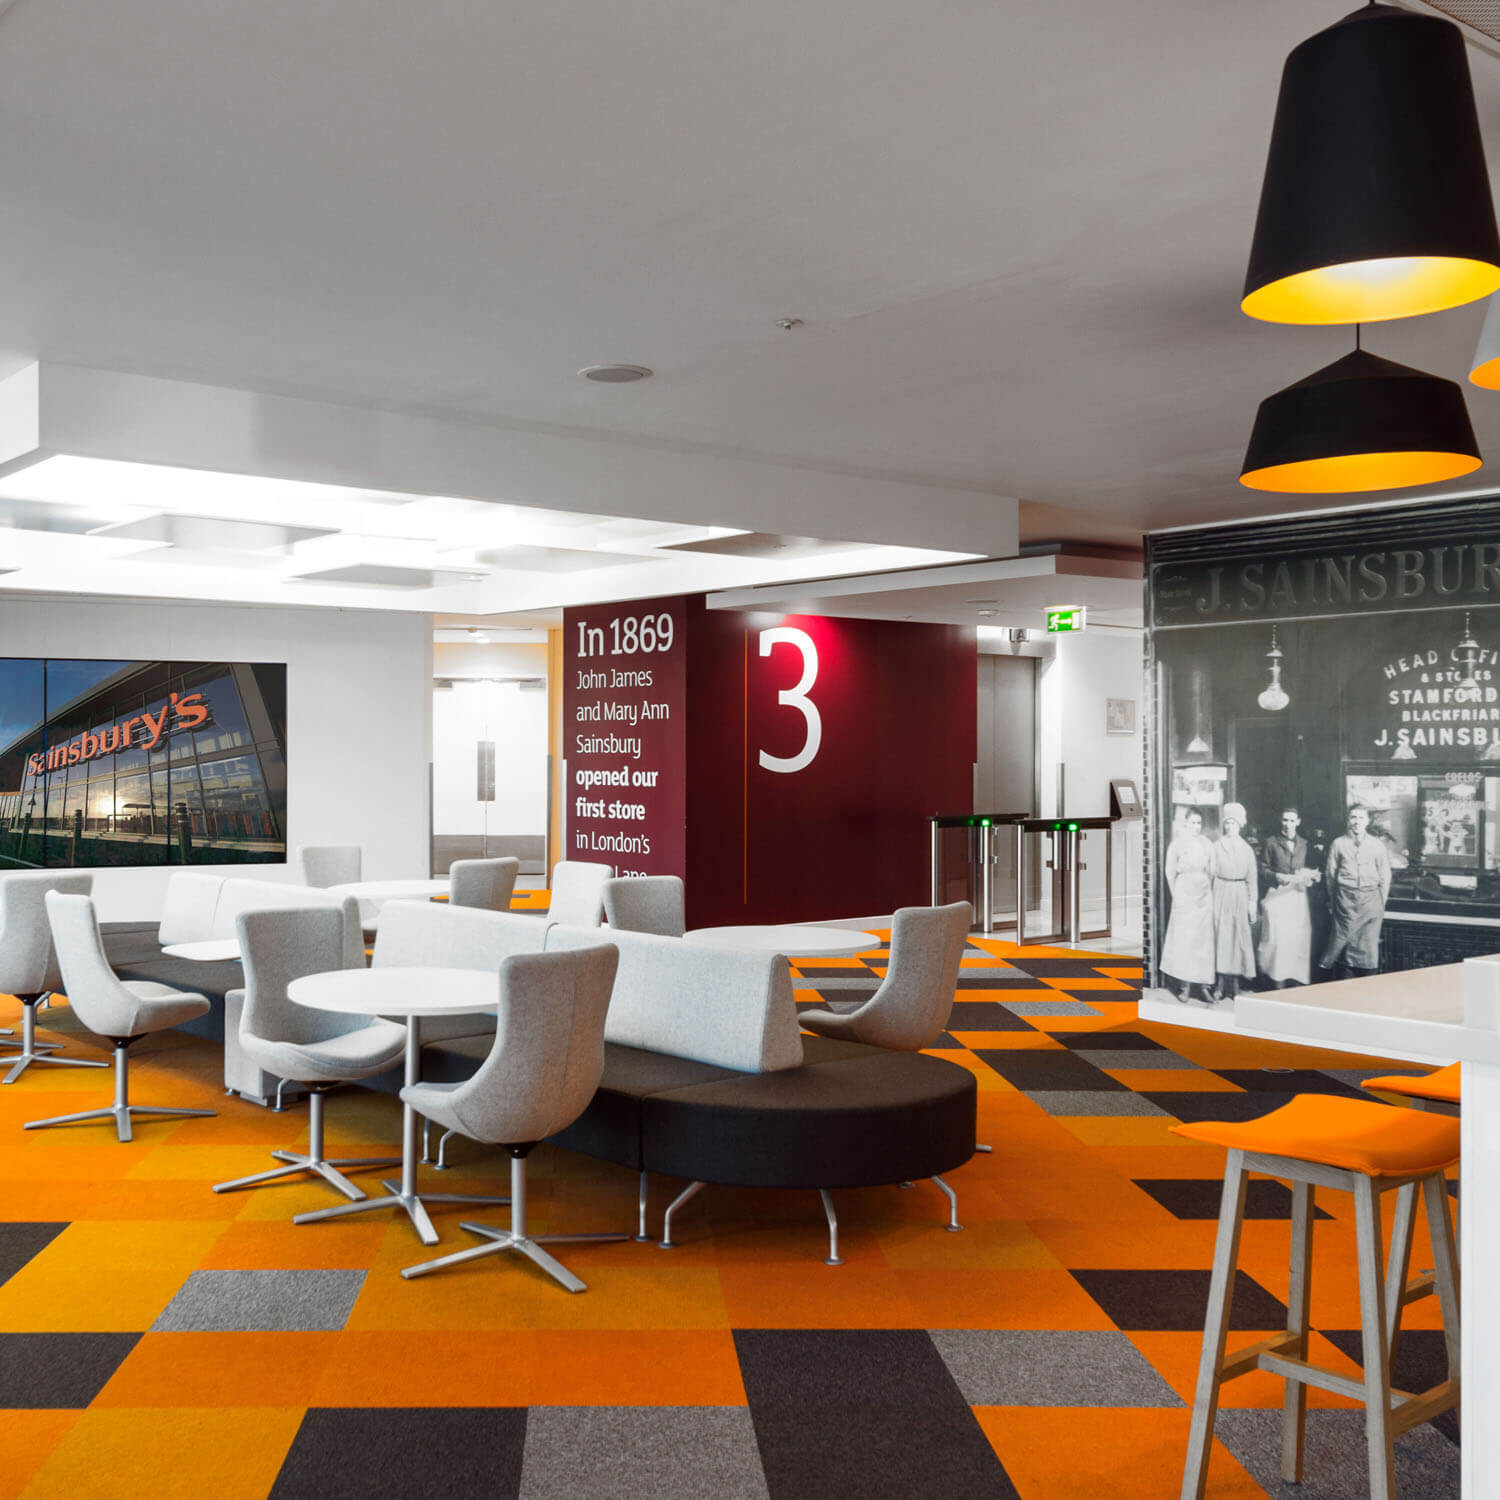  A view of some of the PW design working environments for Sainsbury's